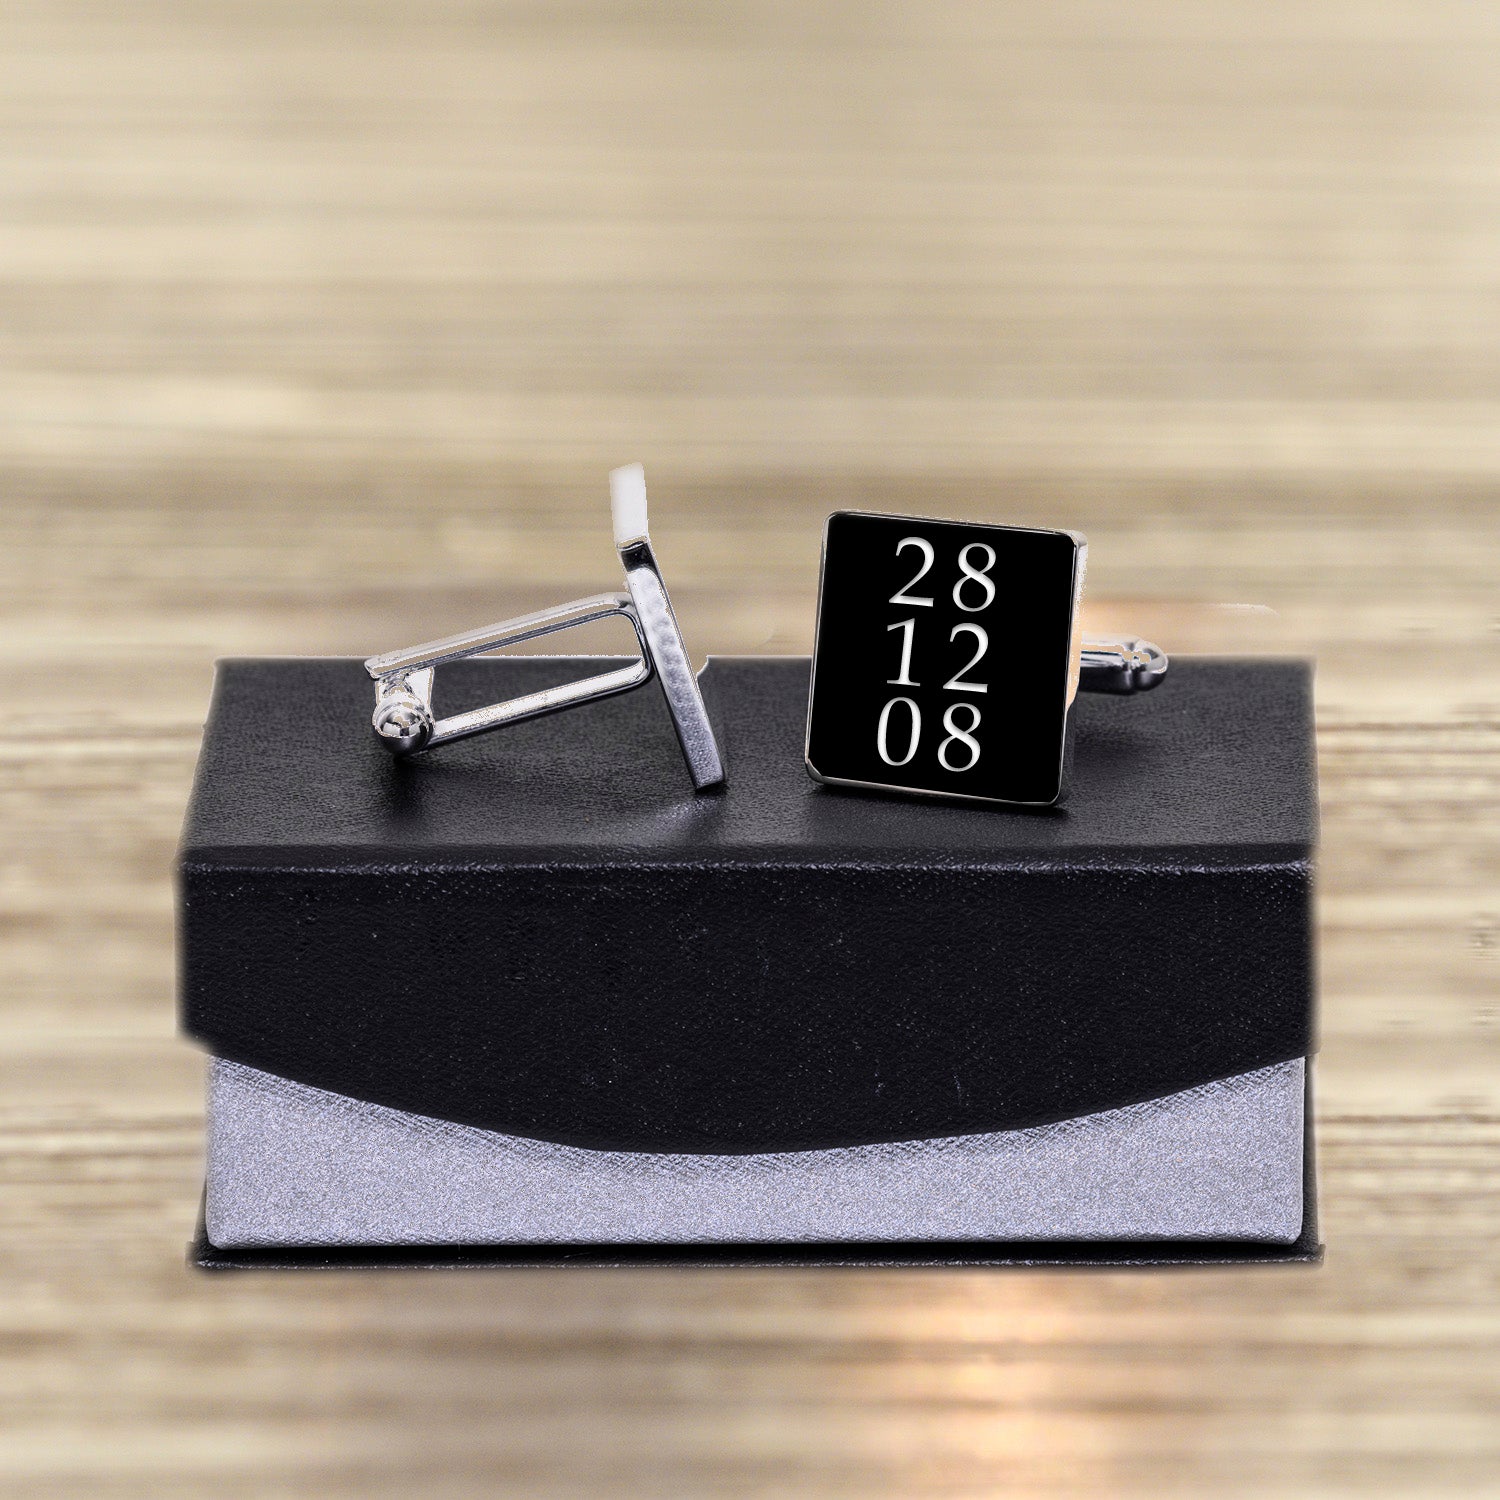 Personalised Special Date/s Cufflinks - PCS Cufflinks & Gifts